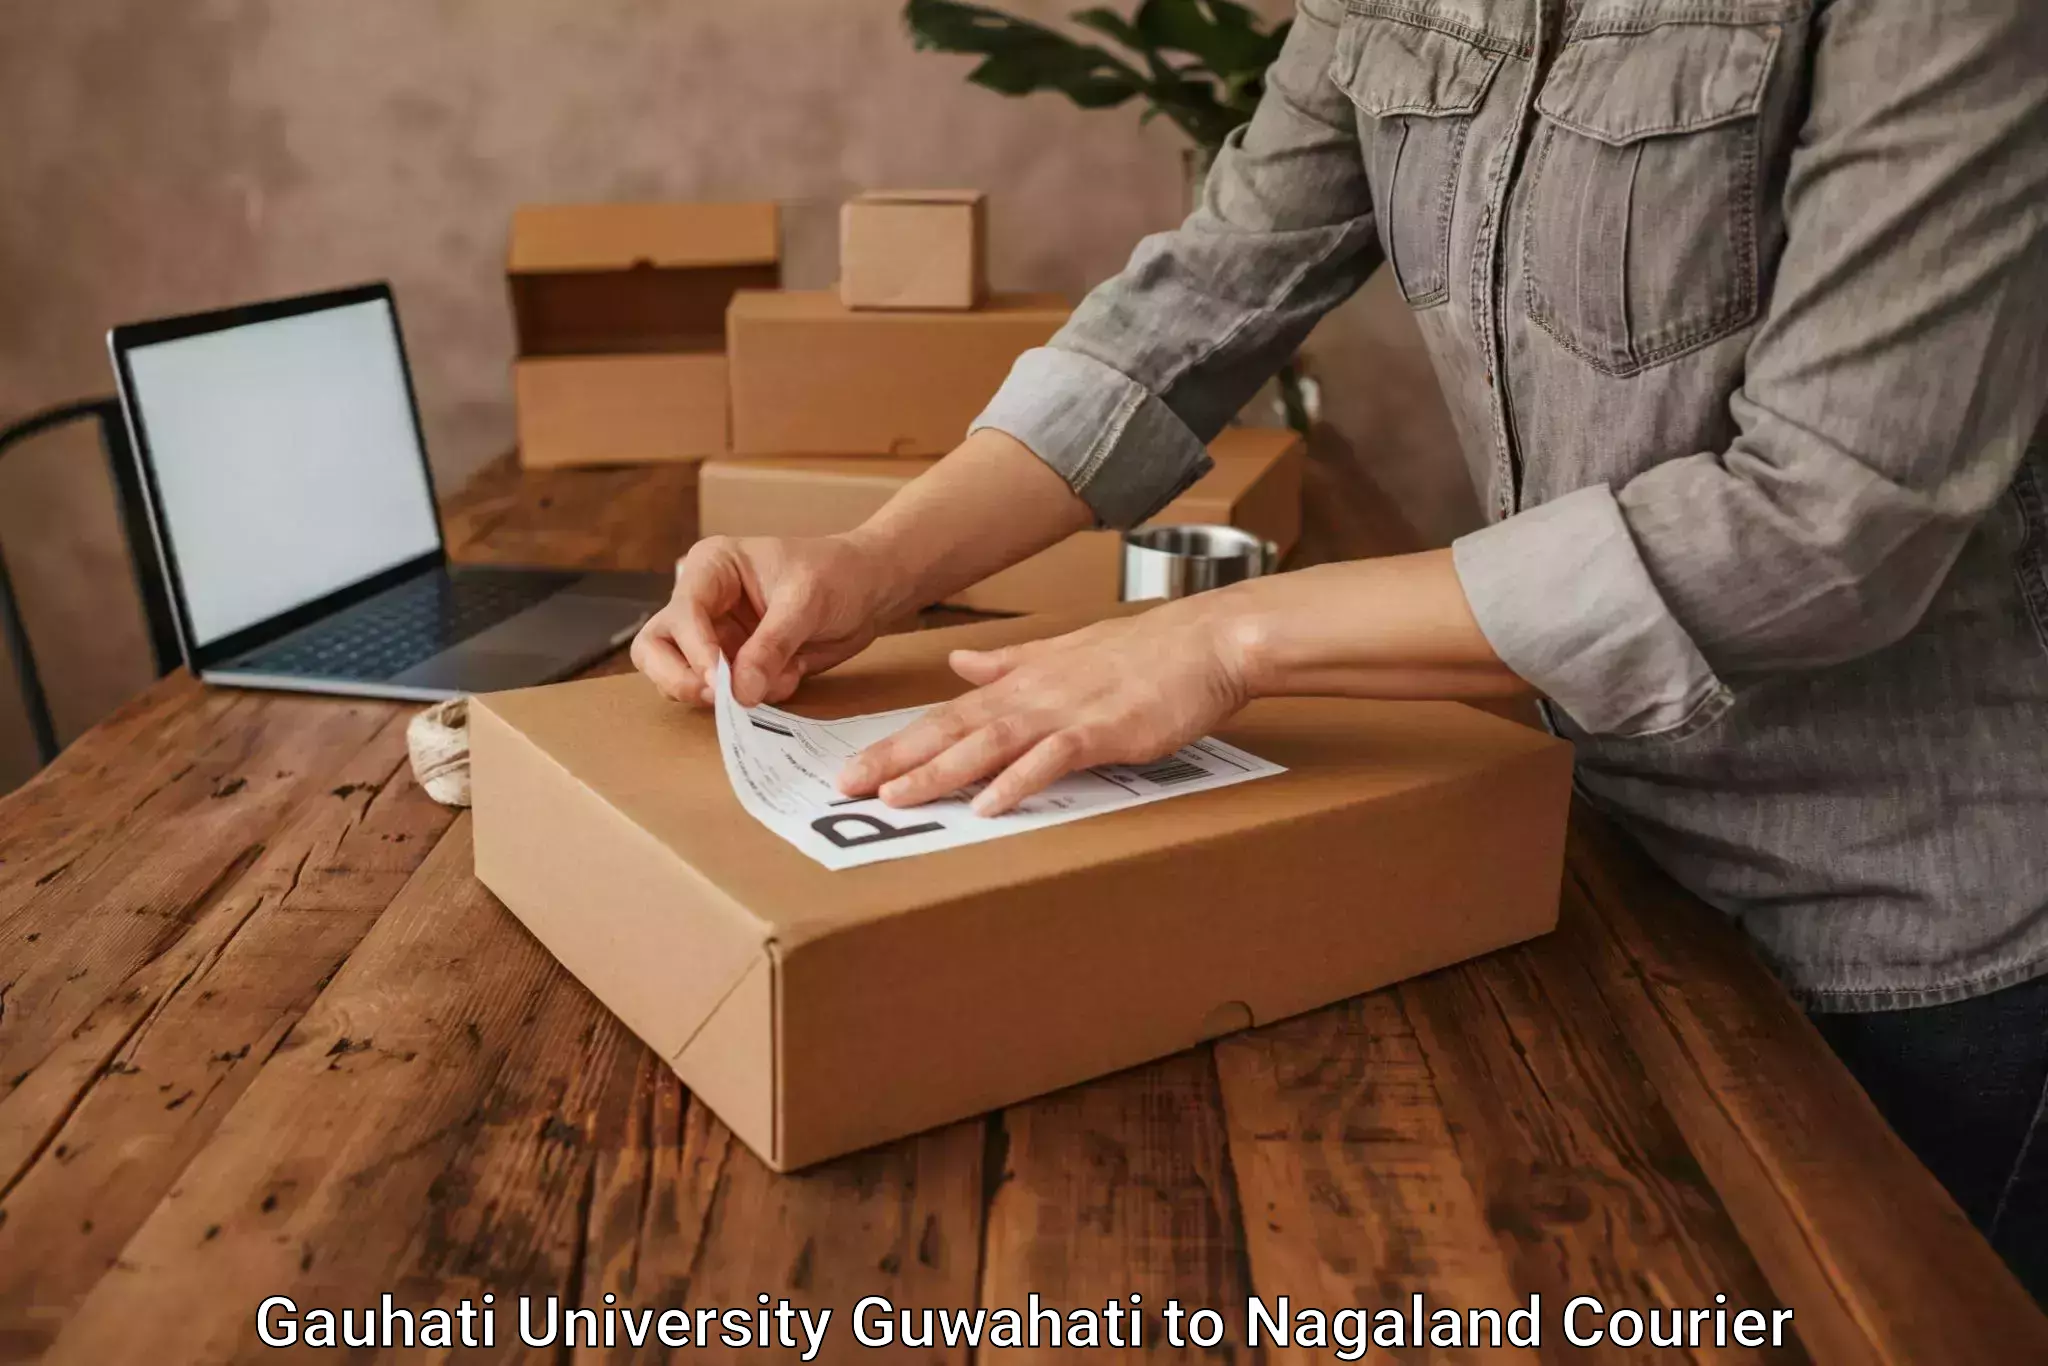 Small parcel delivery in Gauhati University Guwahati to Nagaland